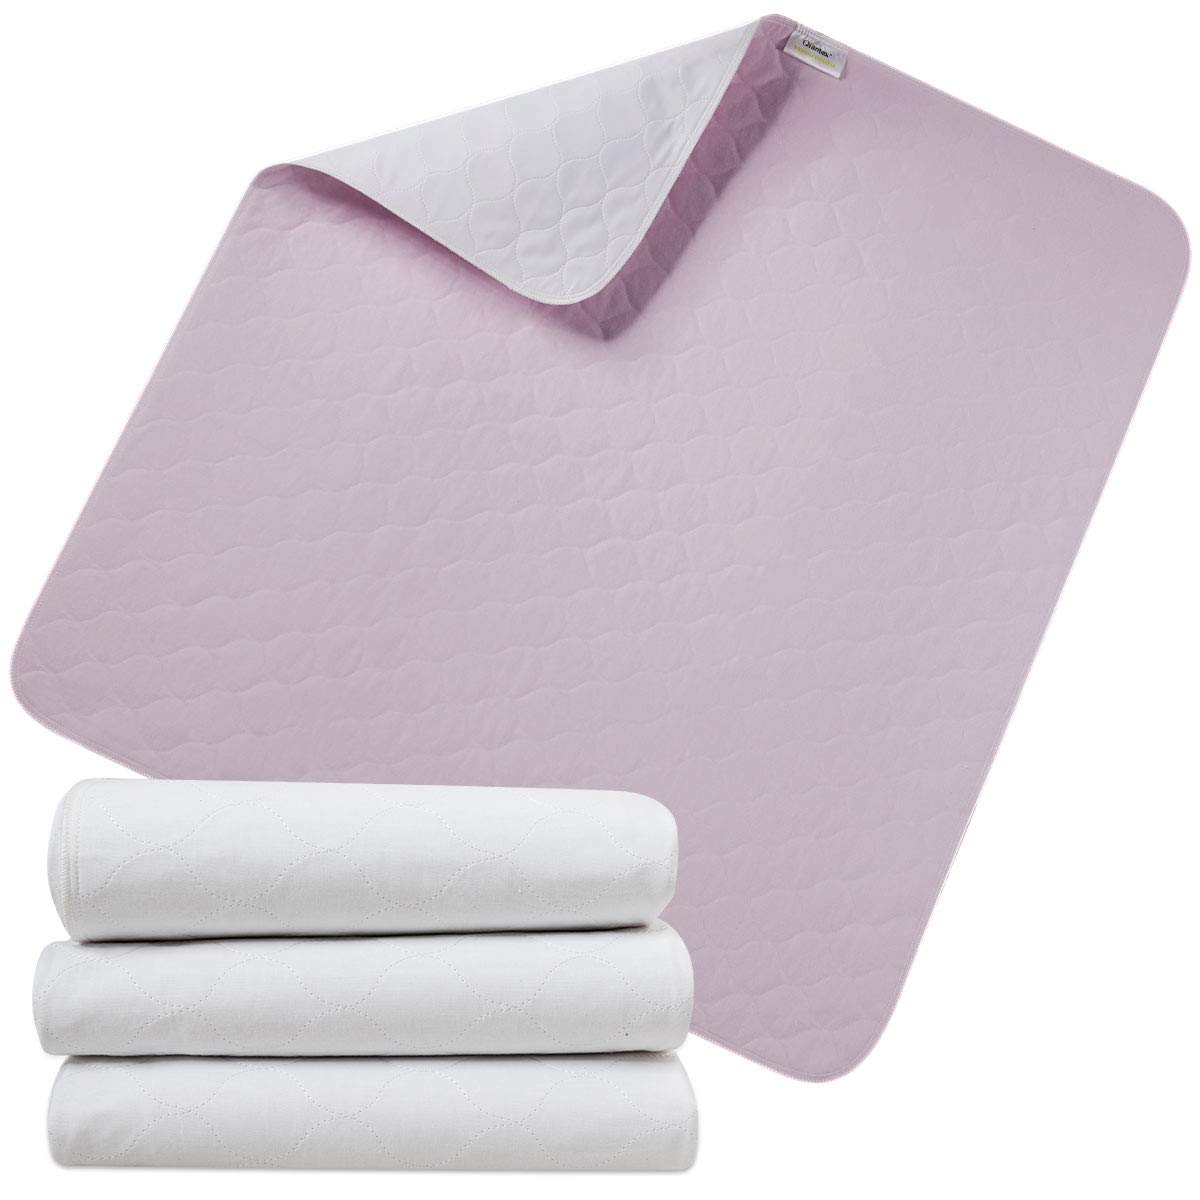 12 Pack Bed Pad Washable Incontinence Underpad - Absorbent Waterproof  Urinary Protection for Seniors Children 34 x 36 Light Pink 